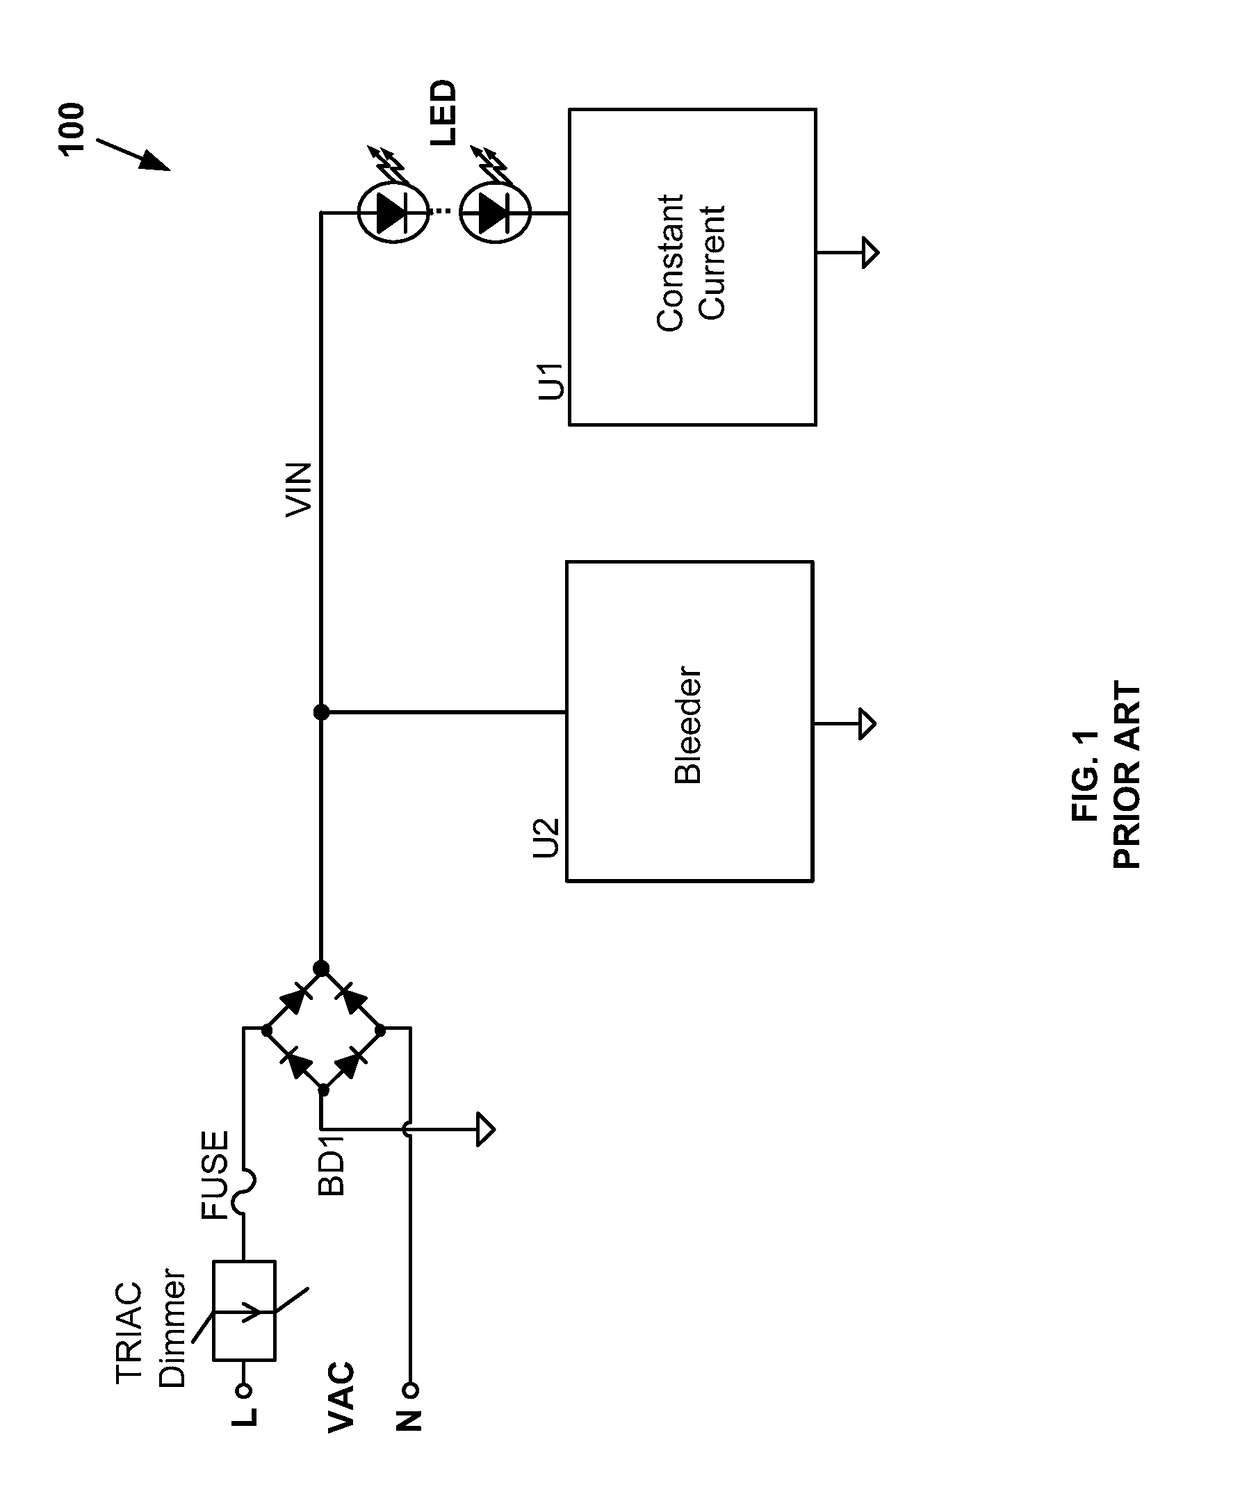 Systems and methods for bleeder control related to lighting emitting diodes